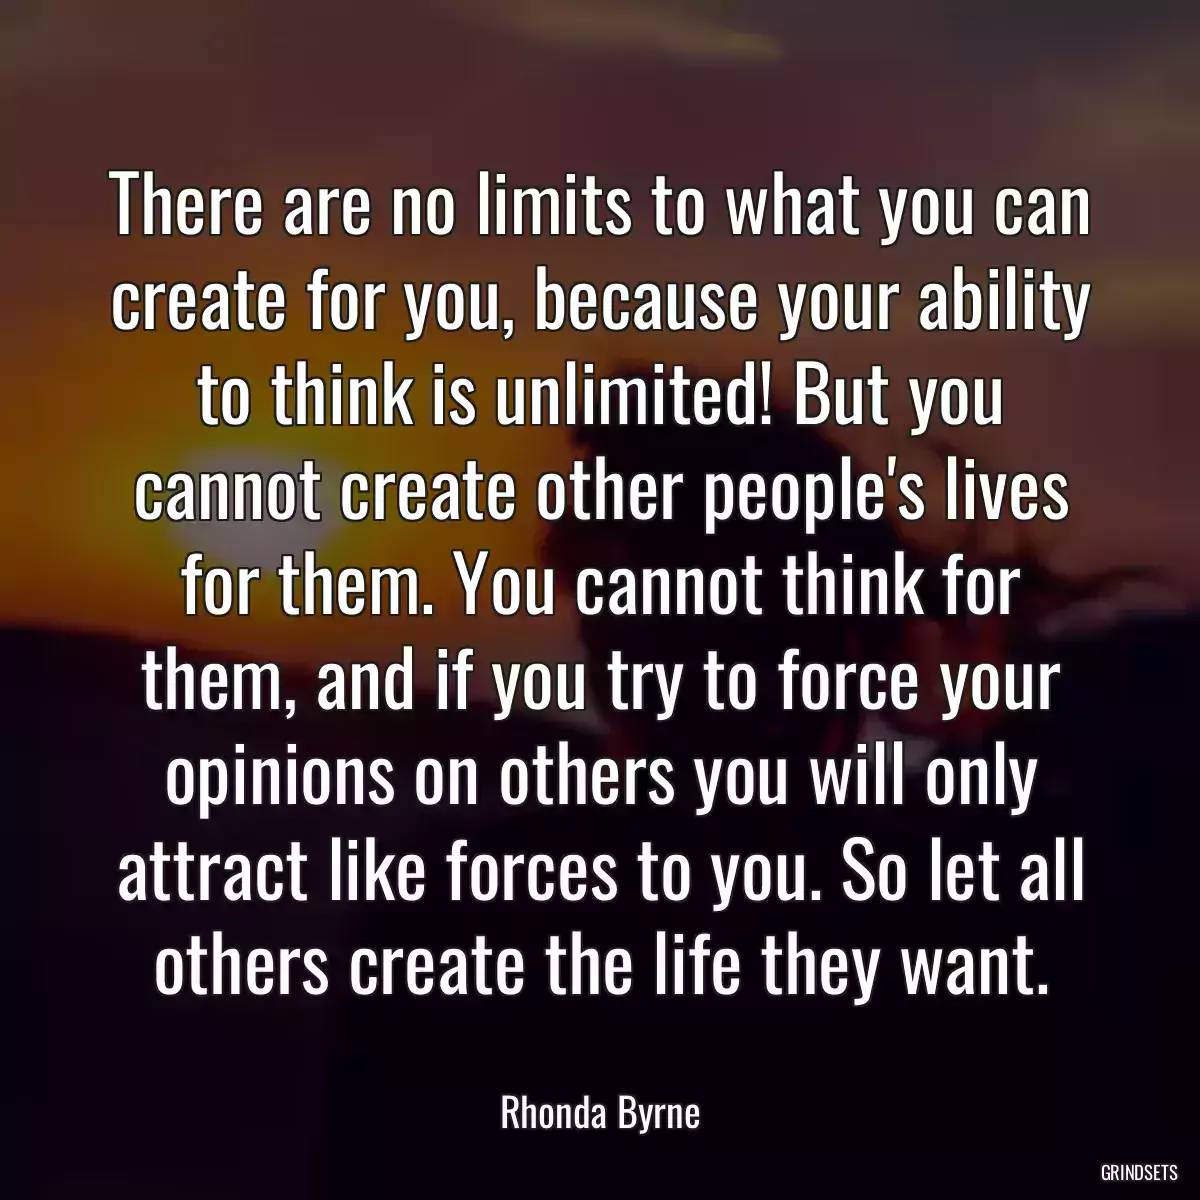 There are no limits to what you can create for you, because your ability to think is unlimited! But you cannot create other people\'s lives for them. You cannot think for them, and if you try to force your opinions on others you will only attract like forces to you. So let all others create the life they want.